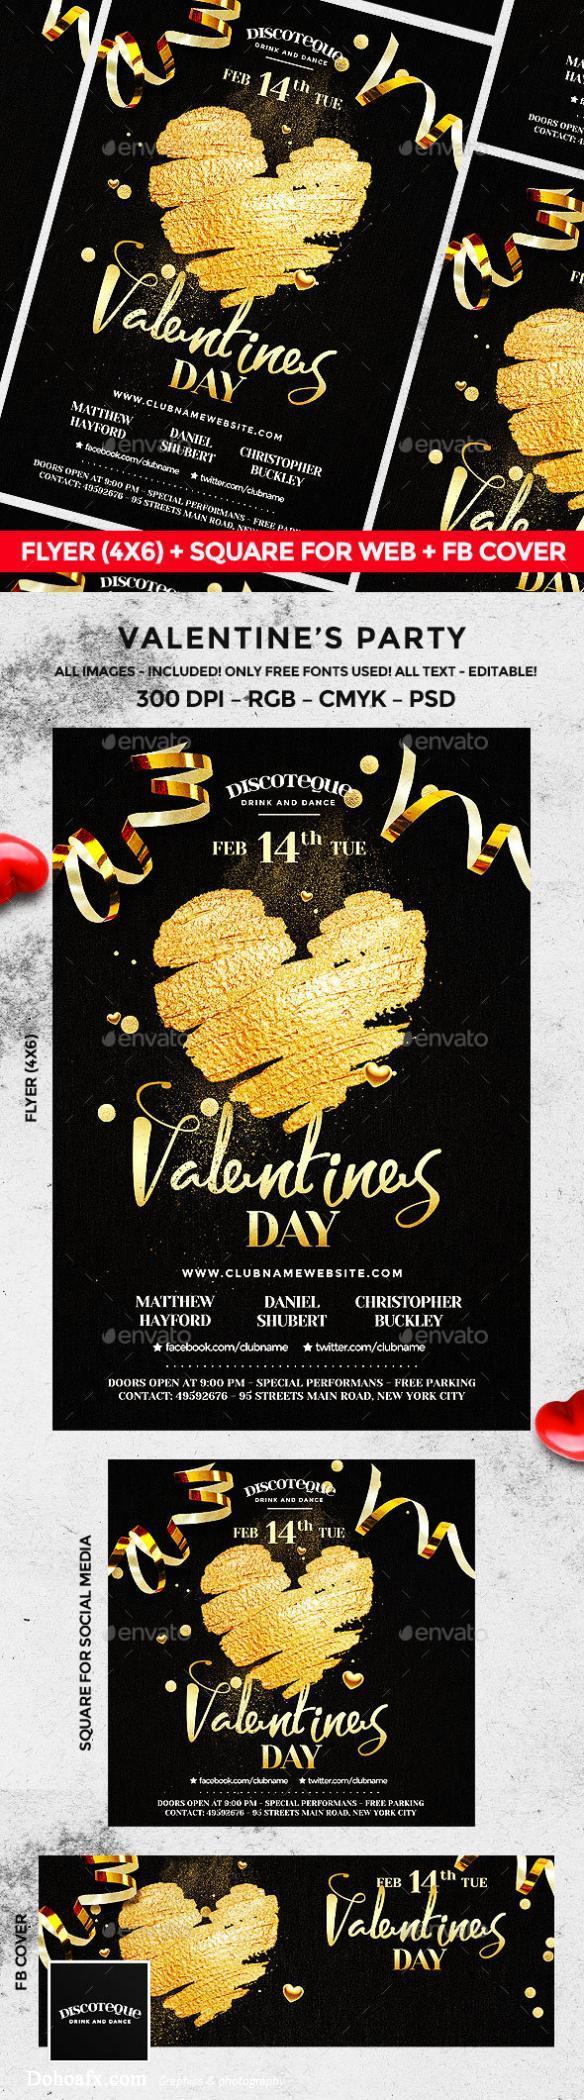 Valentines Day Flyer - Clubs & Parties Events